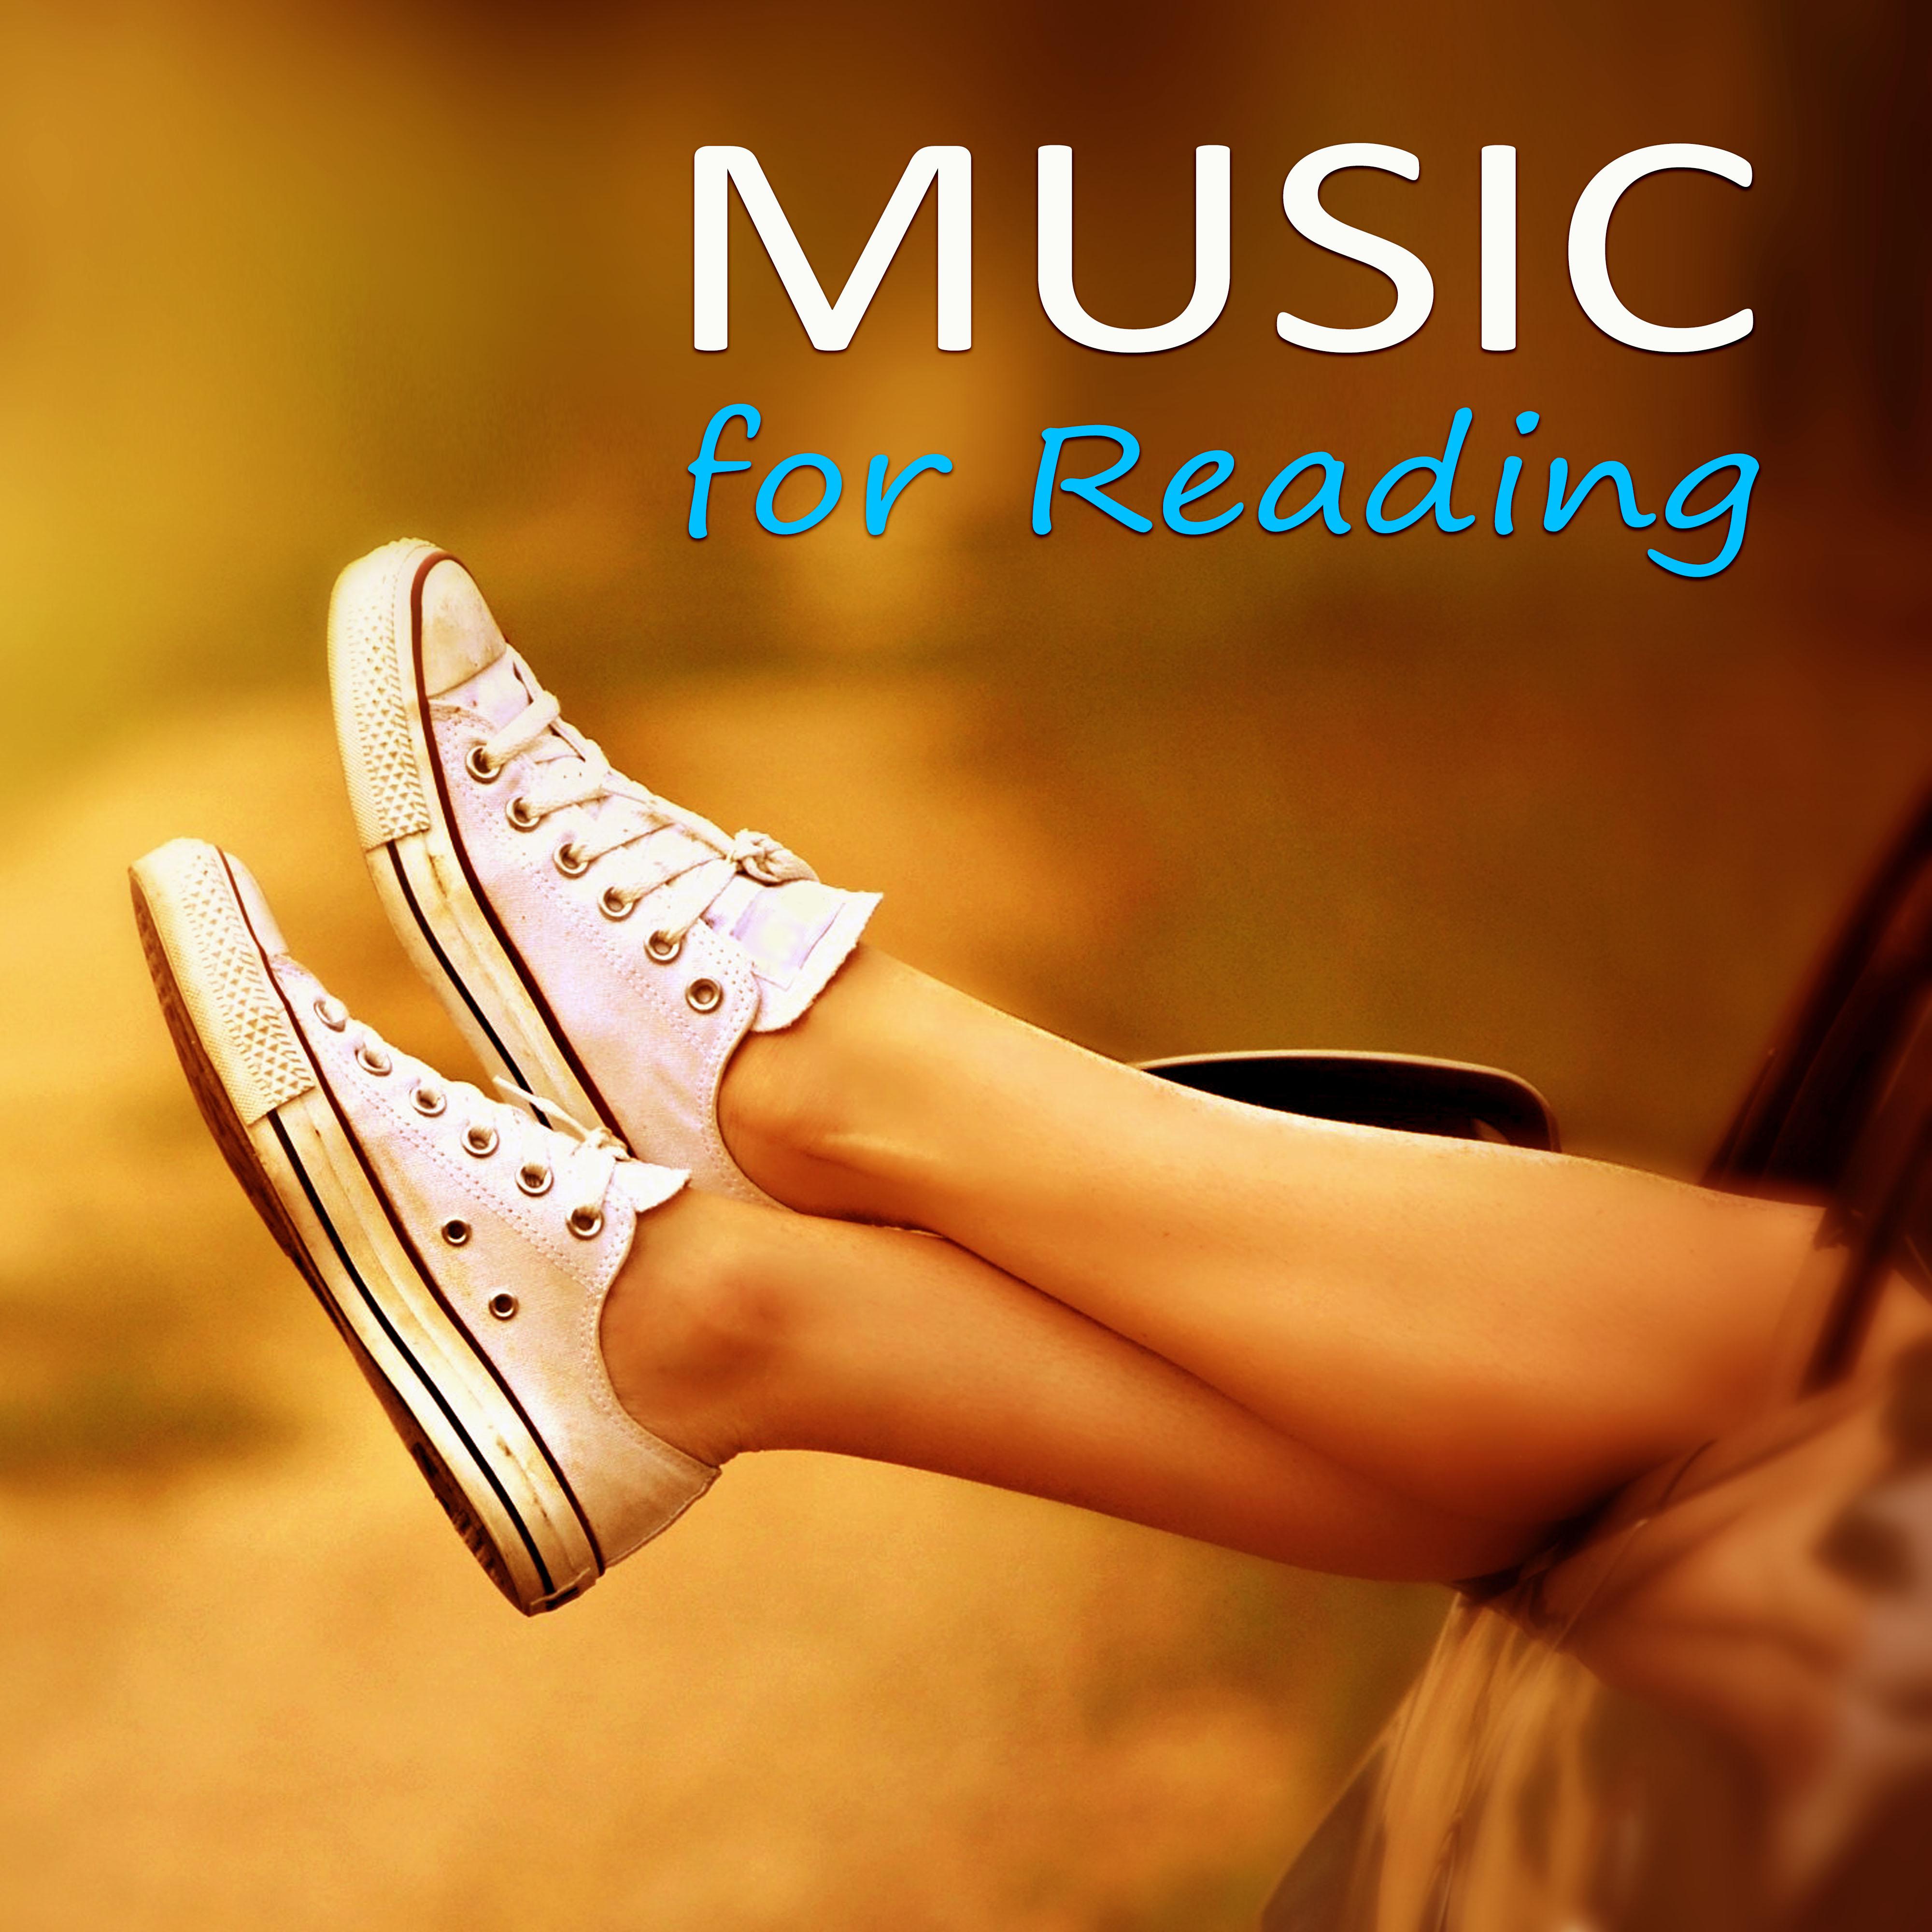 Music for Reading  Deep Meditation, Sounds for Learning, Concentration Music, Study Music, Brain Power, Relaxing Music, New Age